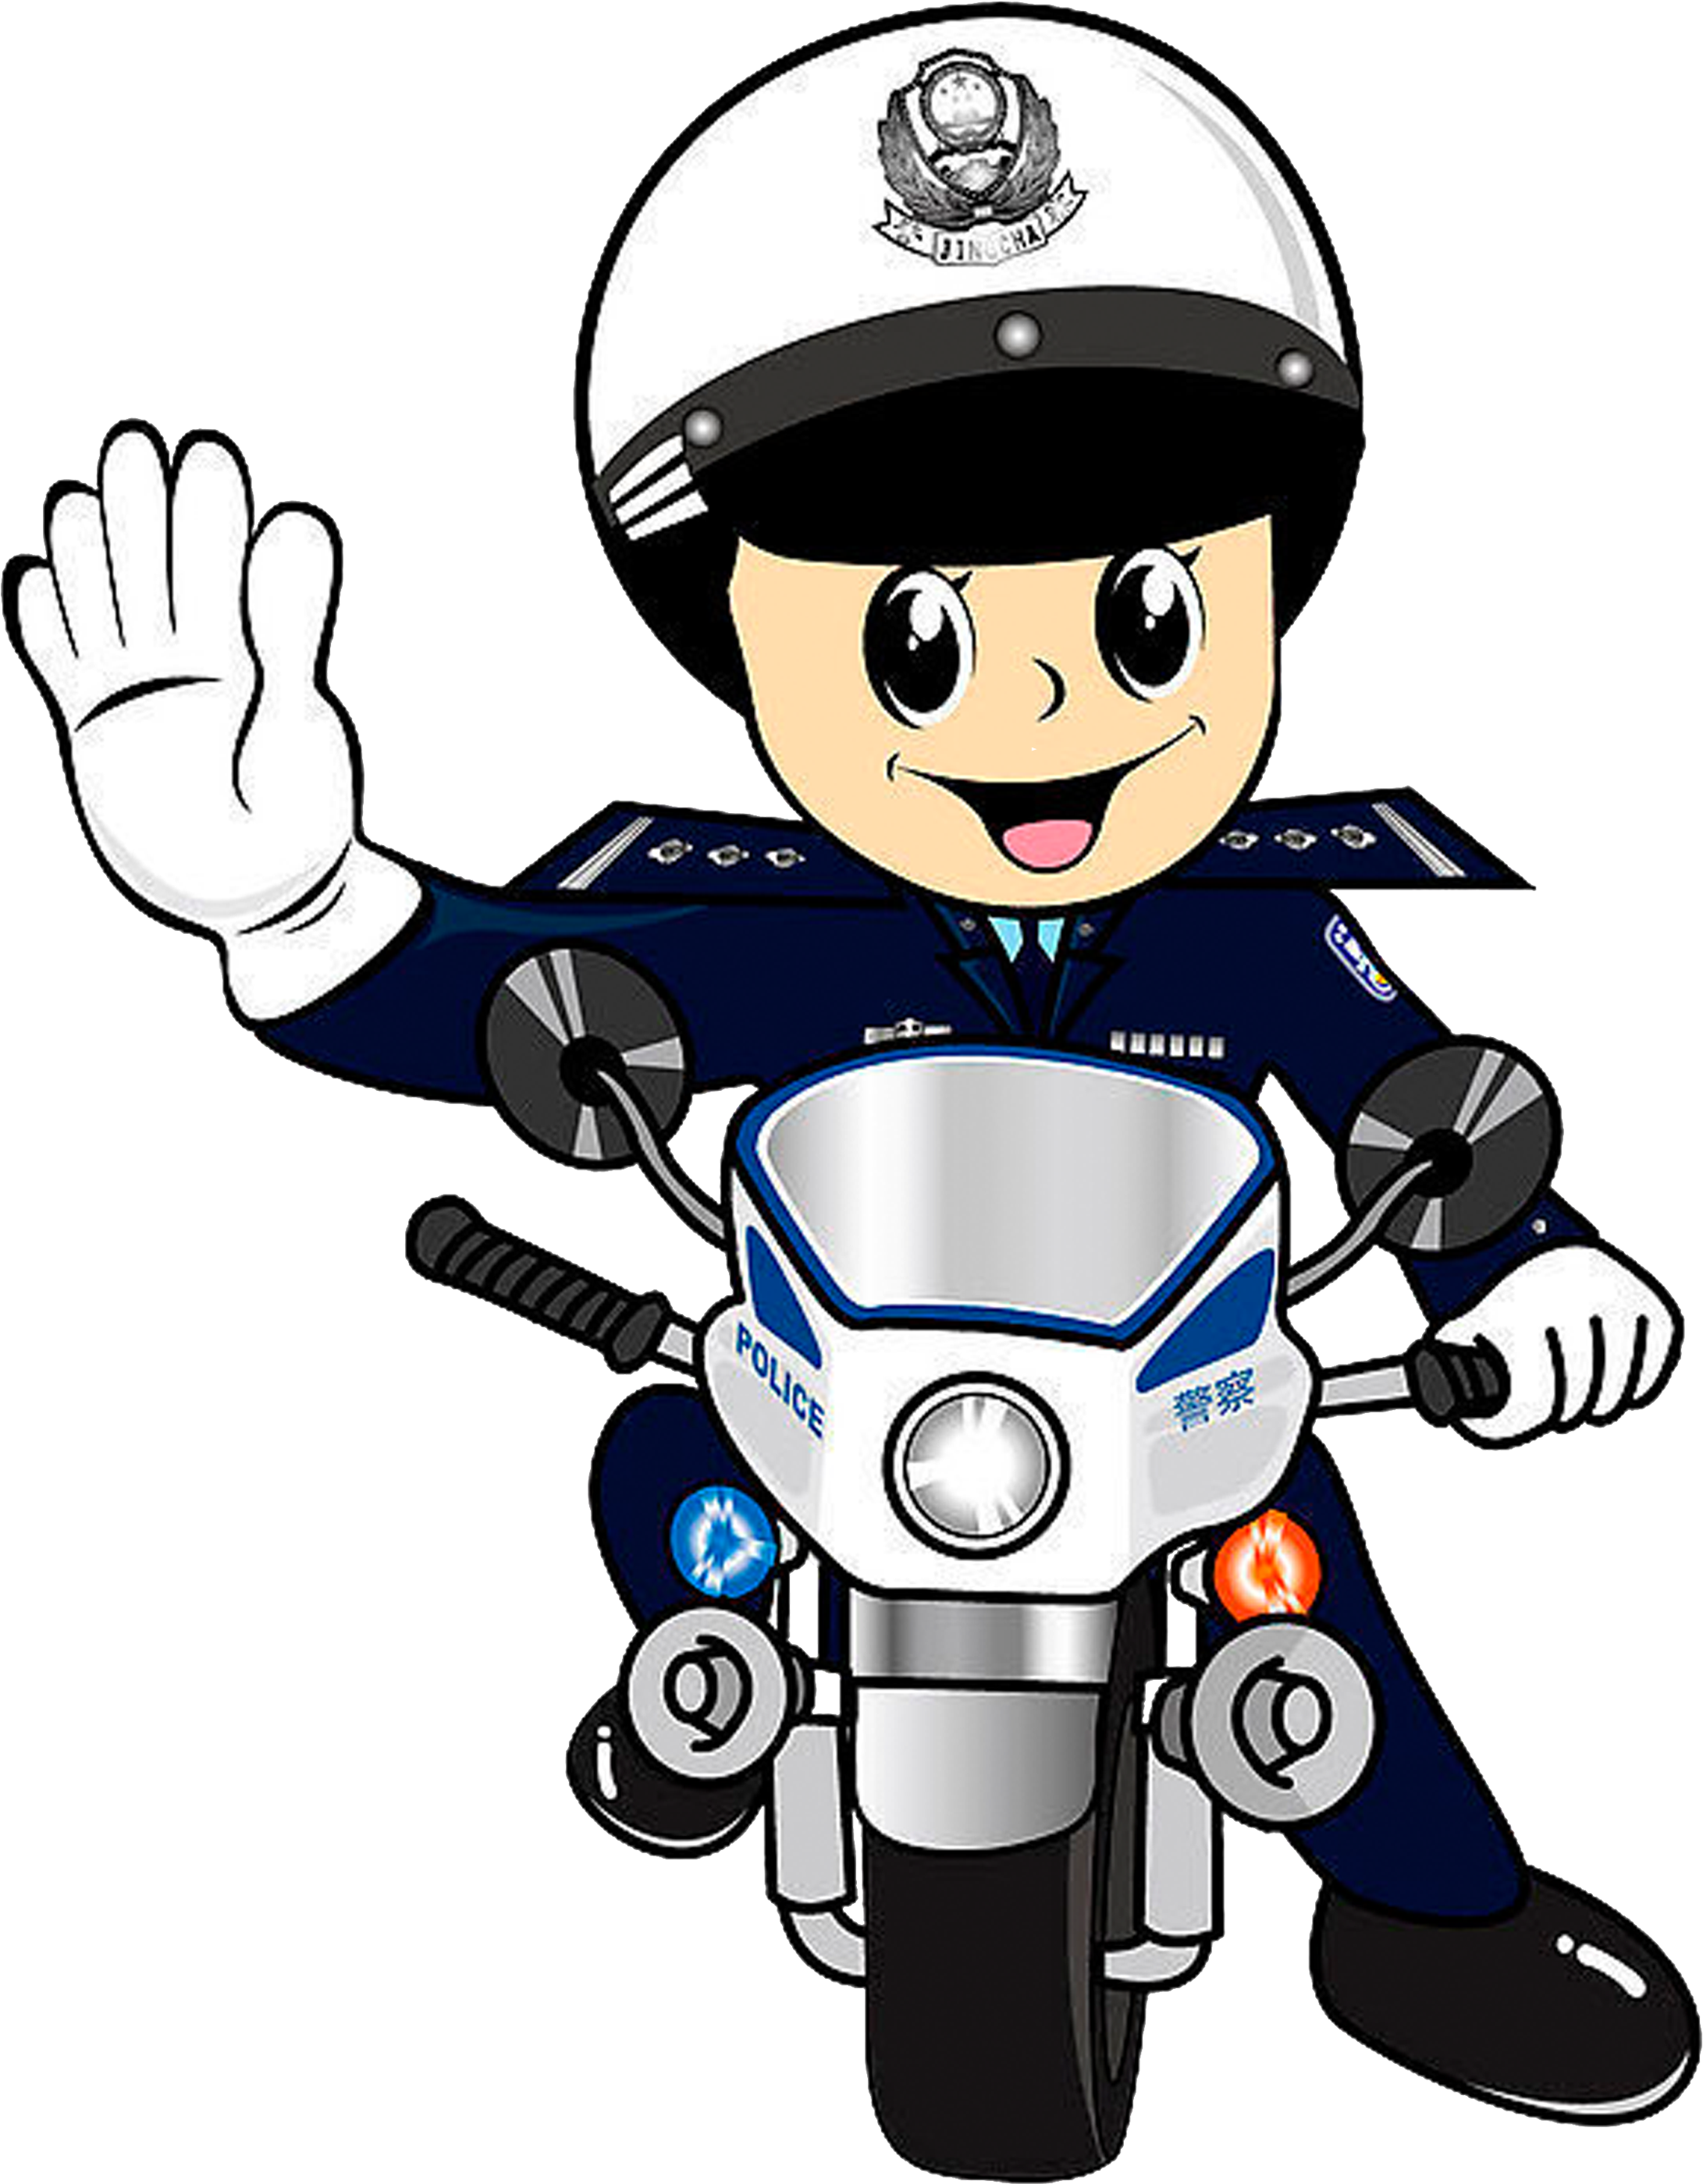 China Police Officer Motorcycle Sina Weibo - Motorcycle Police Traffic Cartoon (5000x5000)